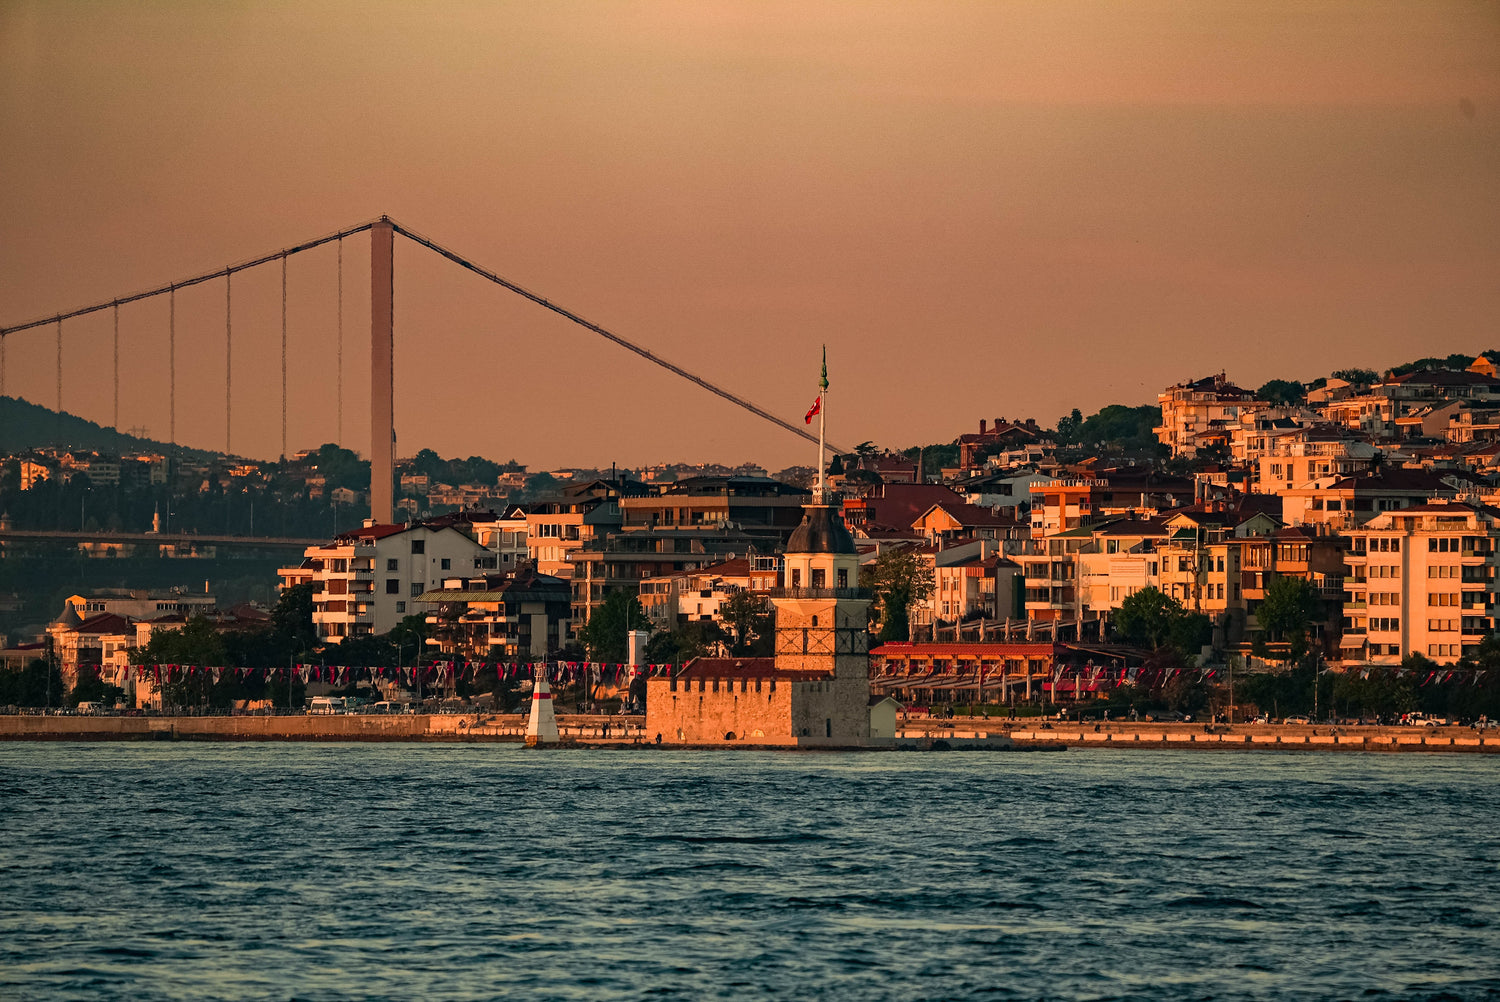 istanbul cultural tours